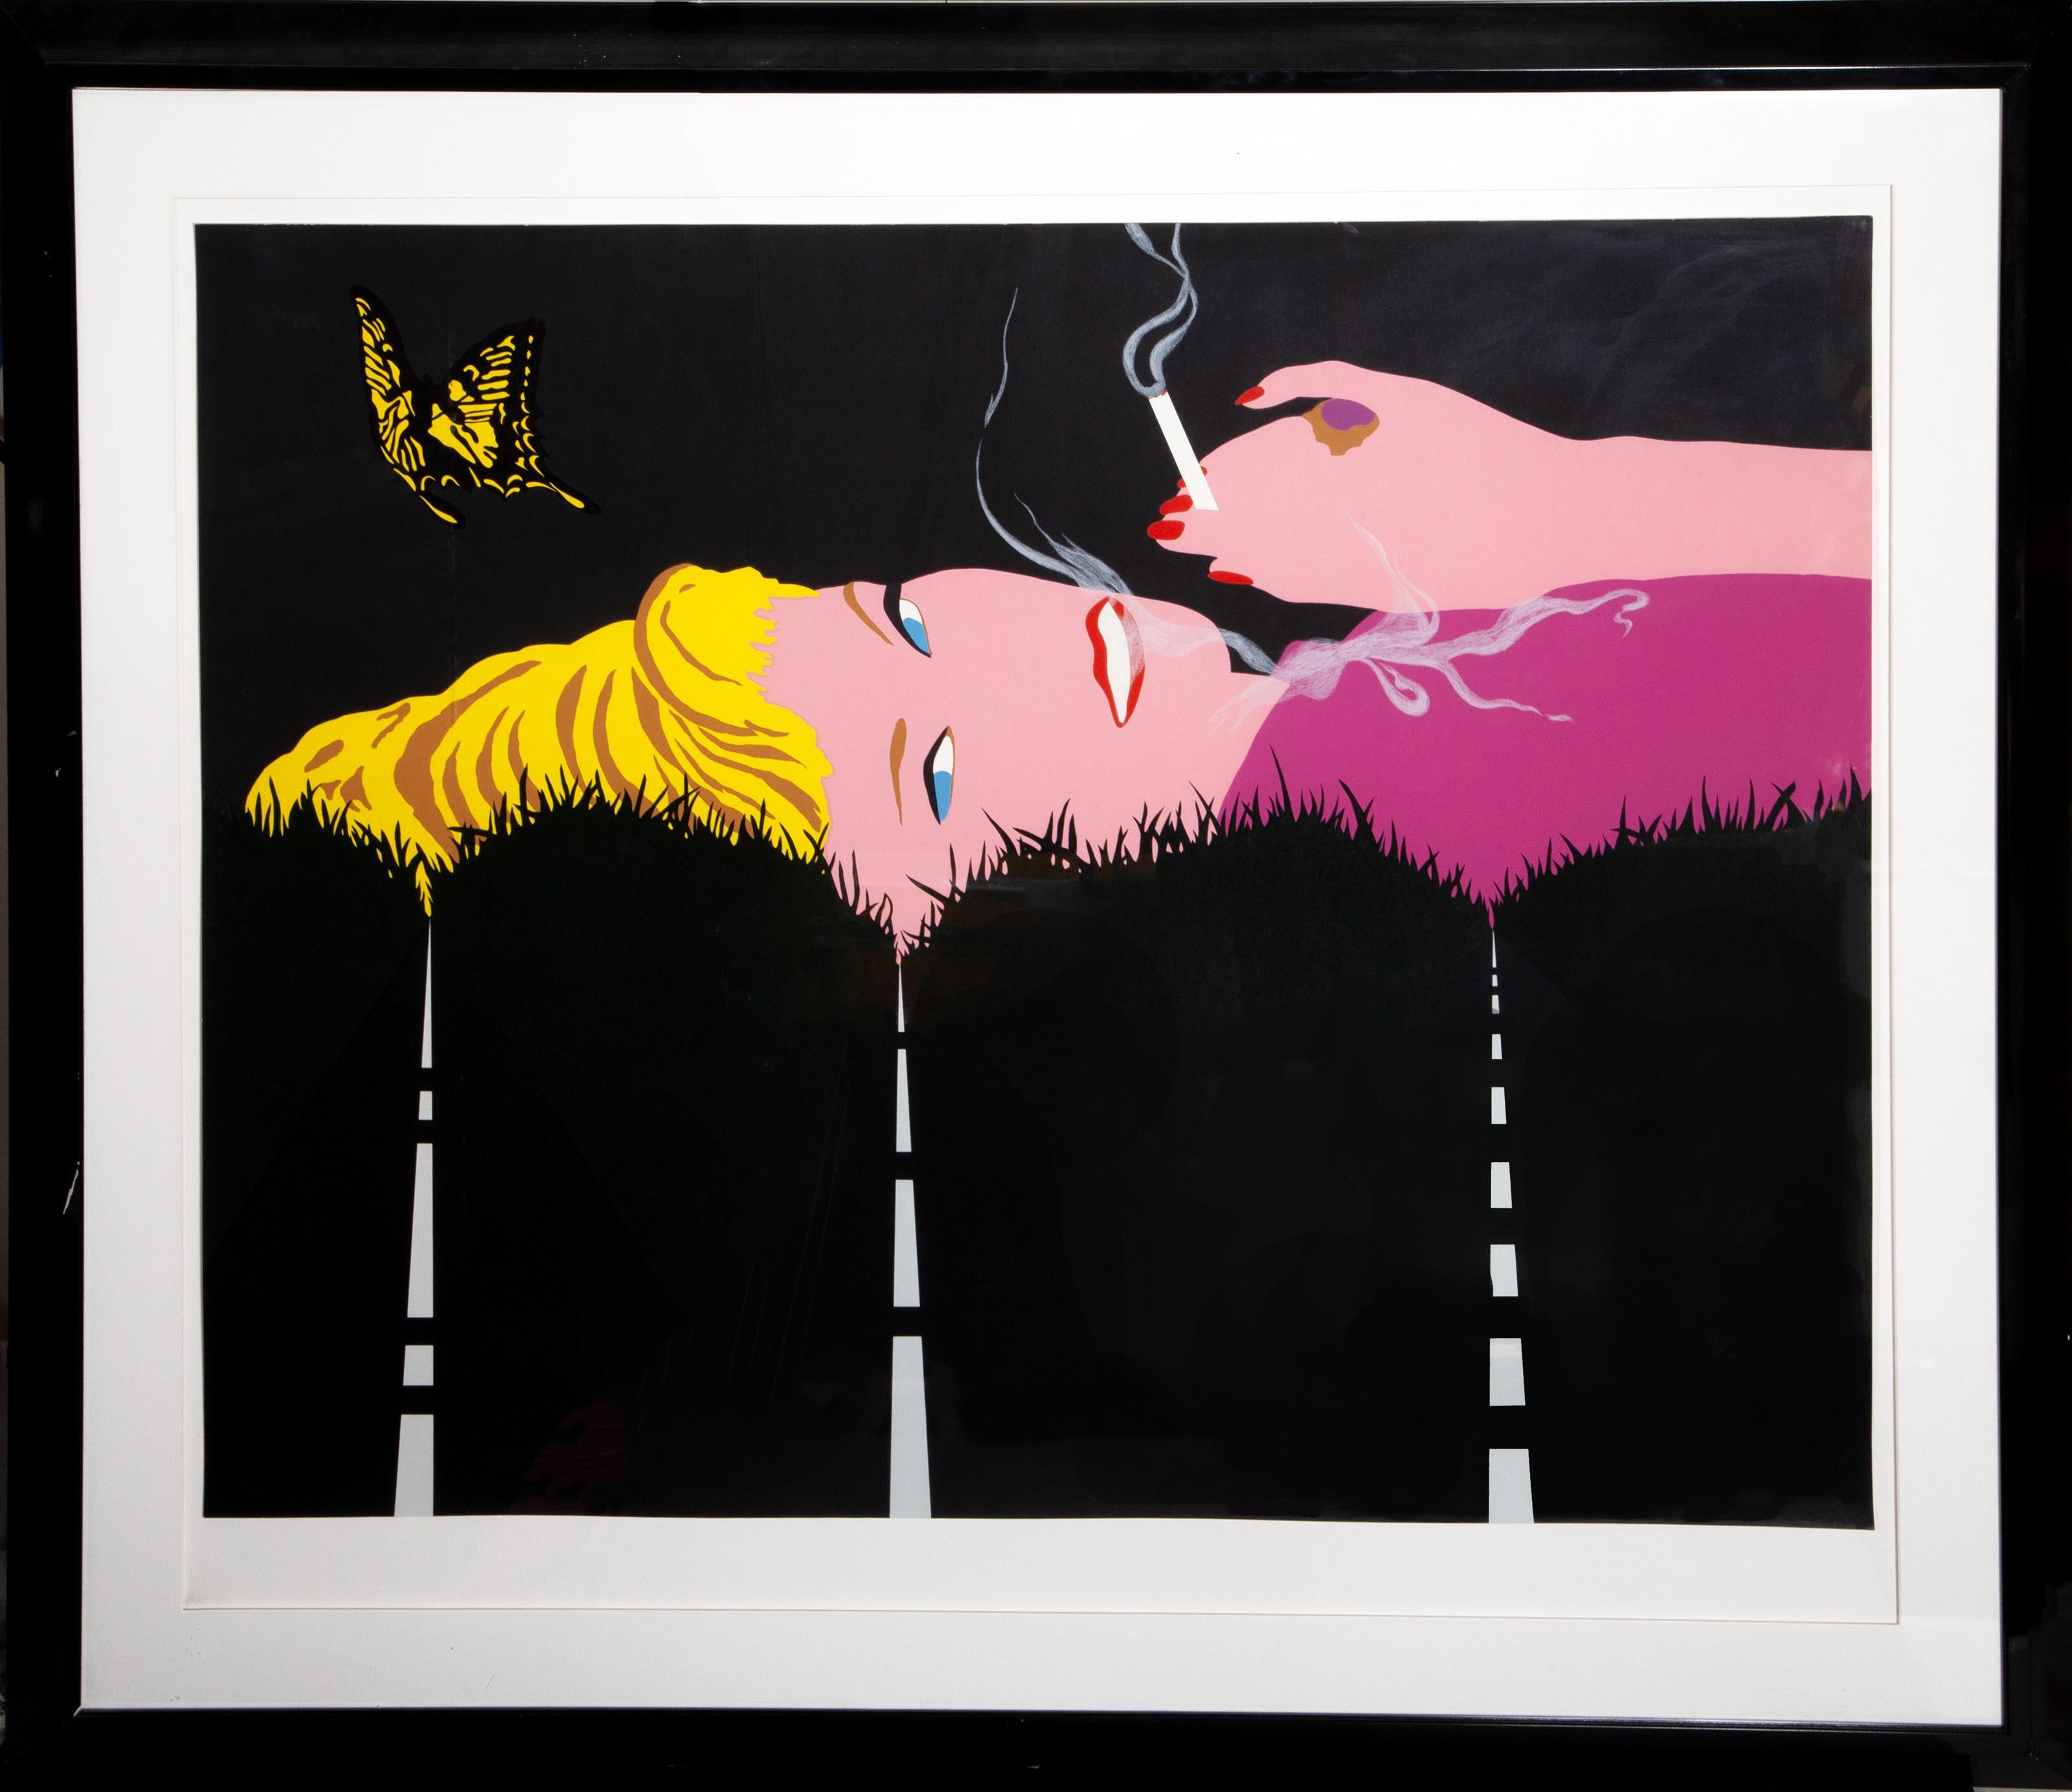 Smoking Blonde
Allan D’Arcangelo, American (1930–1998)
Date: 1990
Screenprint, signed, numbered and dated in pencil
Edition of 57/65
Size: 37 x 46.5 in. (93.98 x 118.11 cm)
Frame Size: 51 x 58 inches